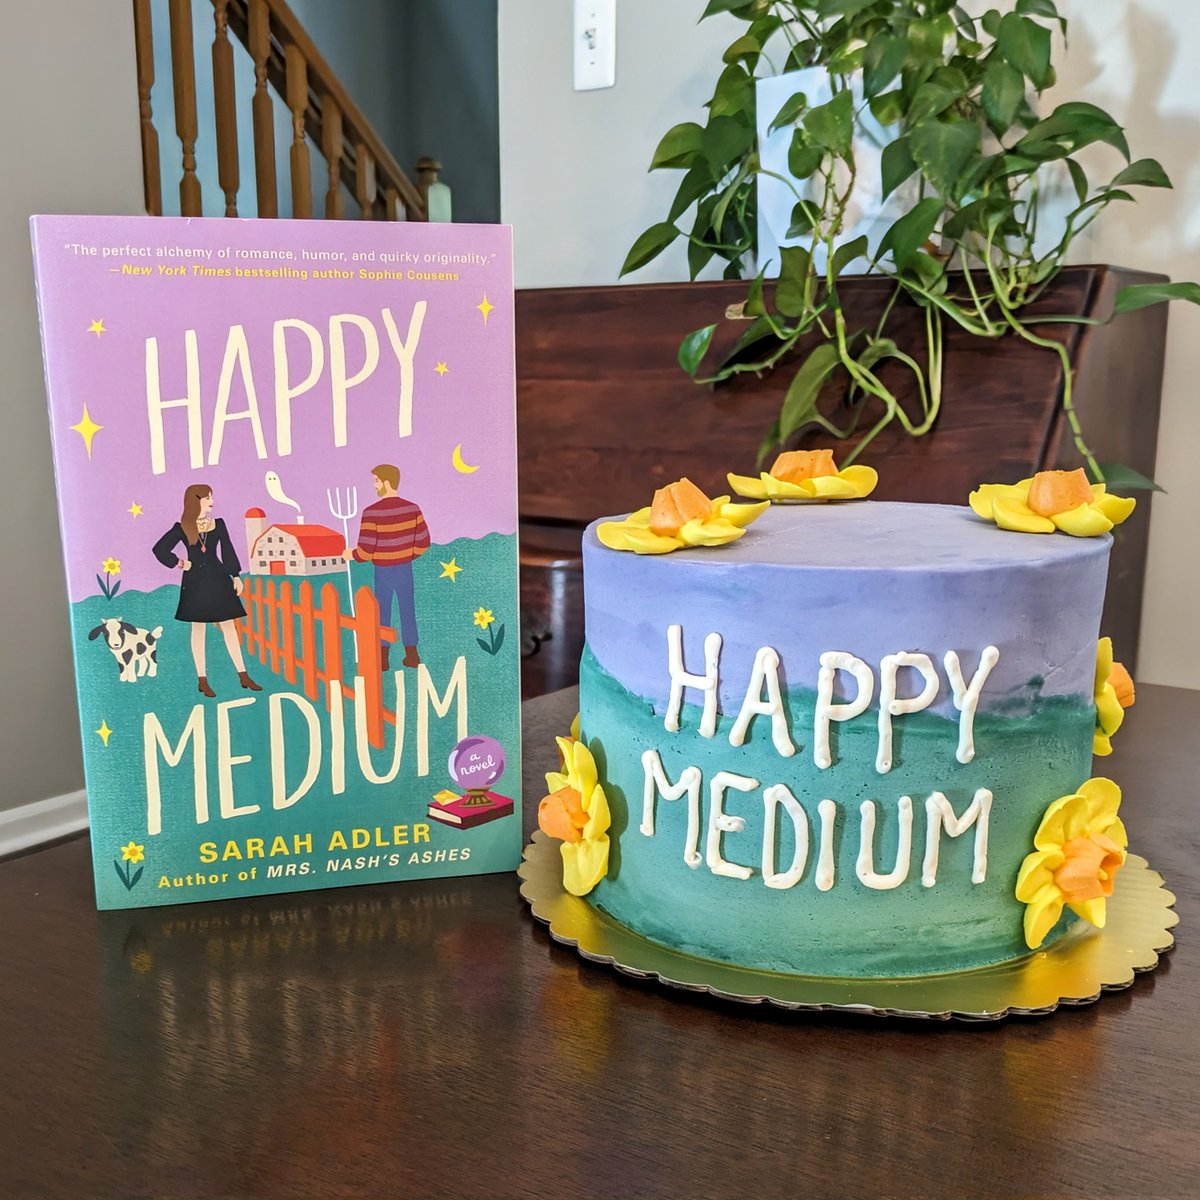 It's here!! HAPPY MEDIUM is now out in the US and UK!!!